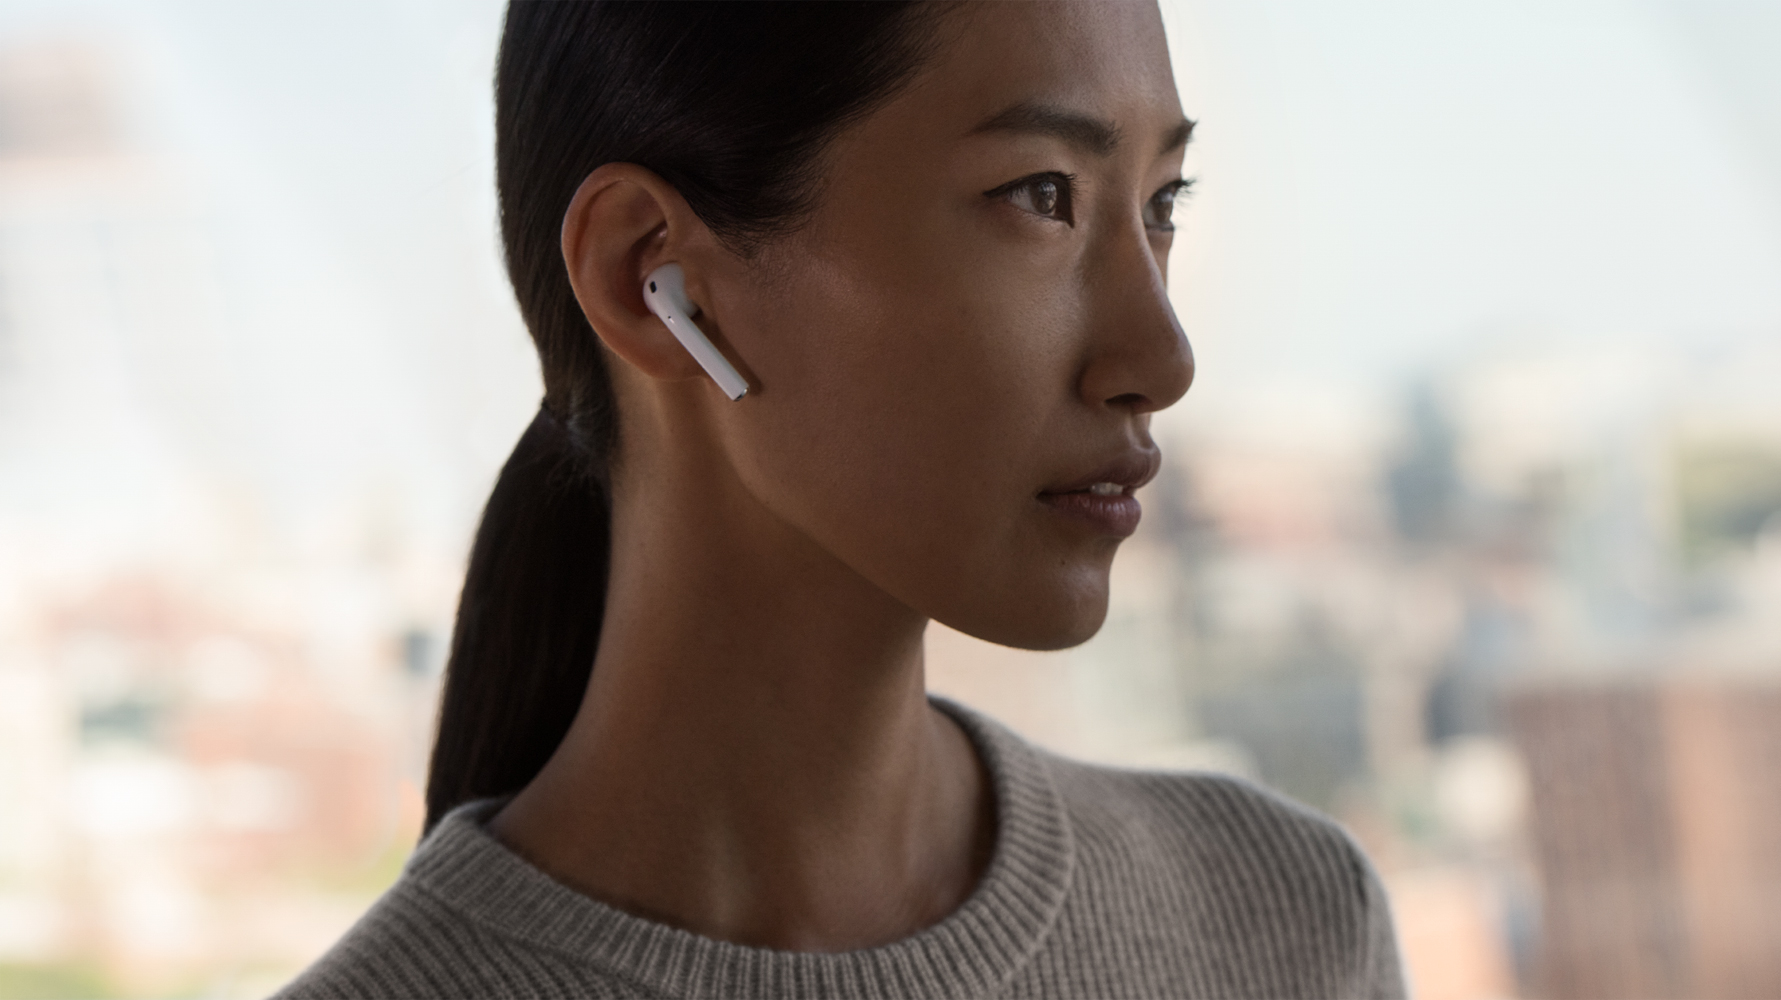 Apple AirPods should come in sets of three